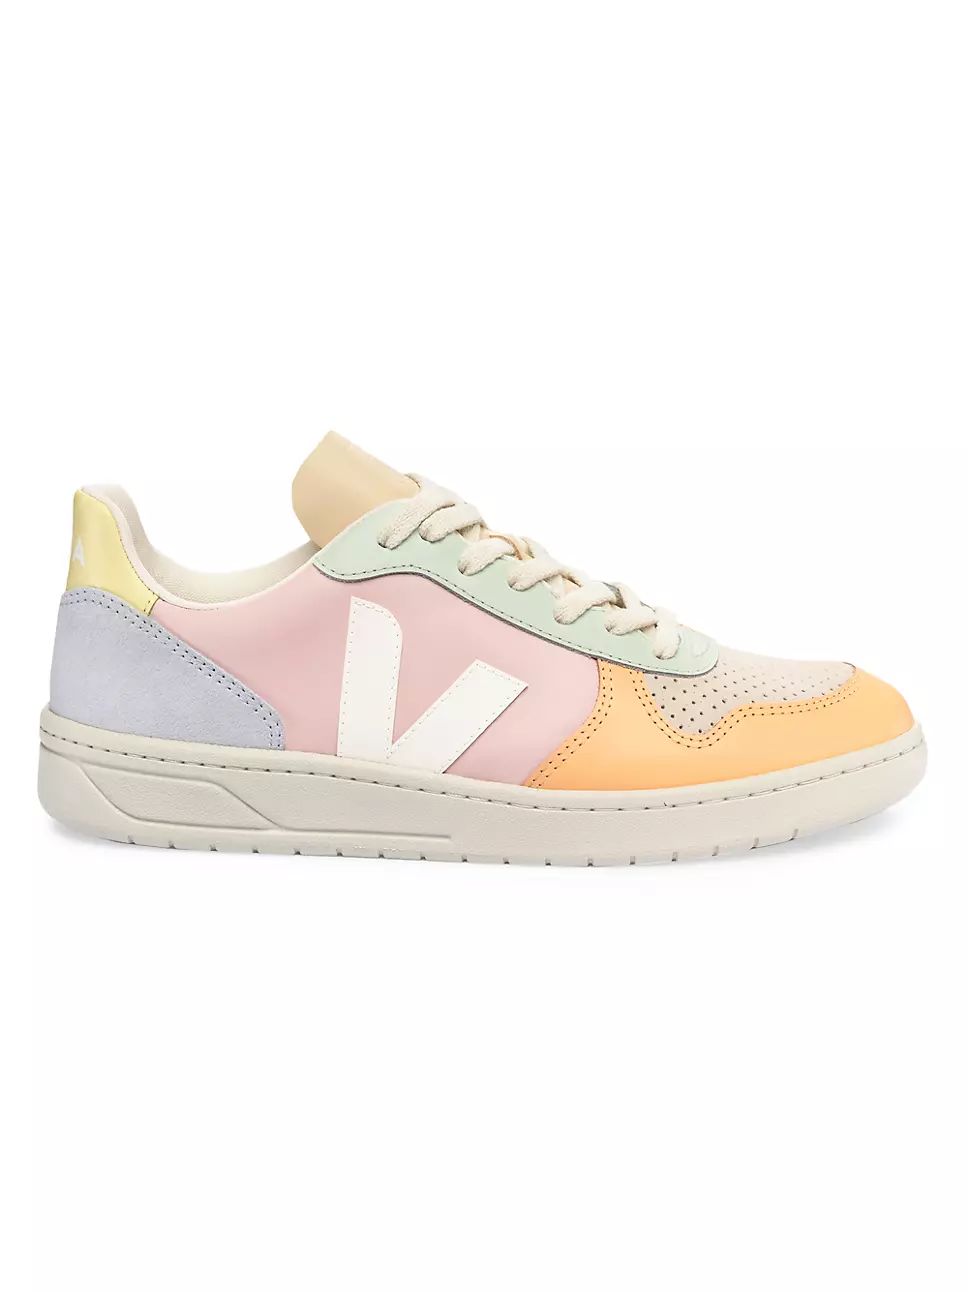 V-10 Colorblocked Leather Low-Top Sneakers | Saks Fifth Avenue